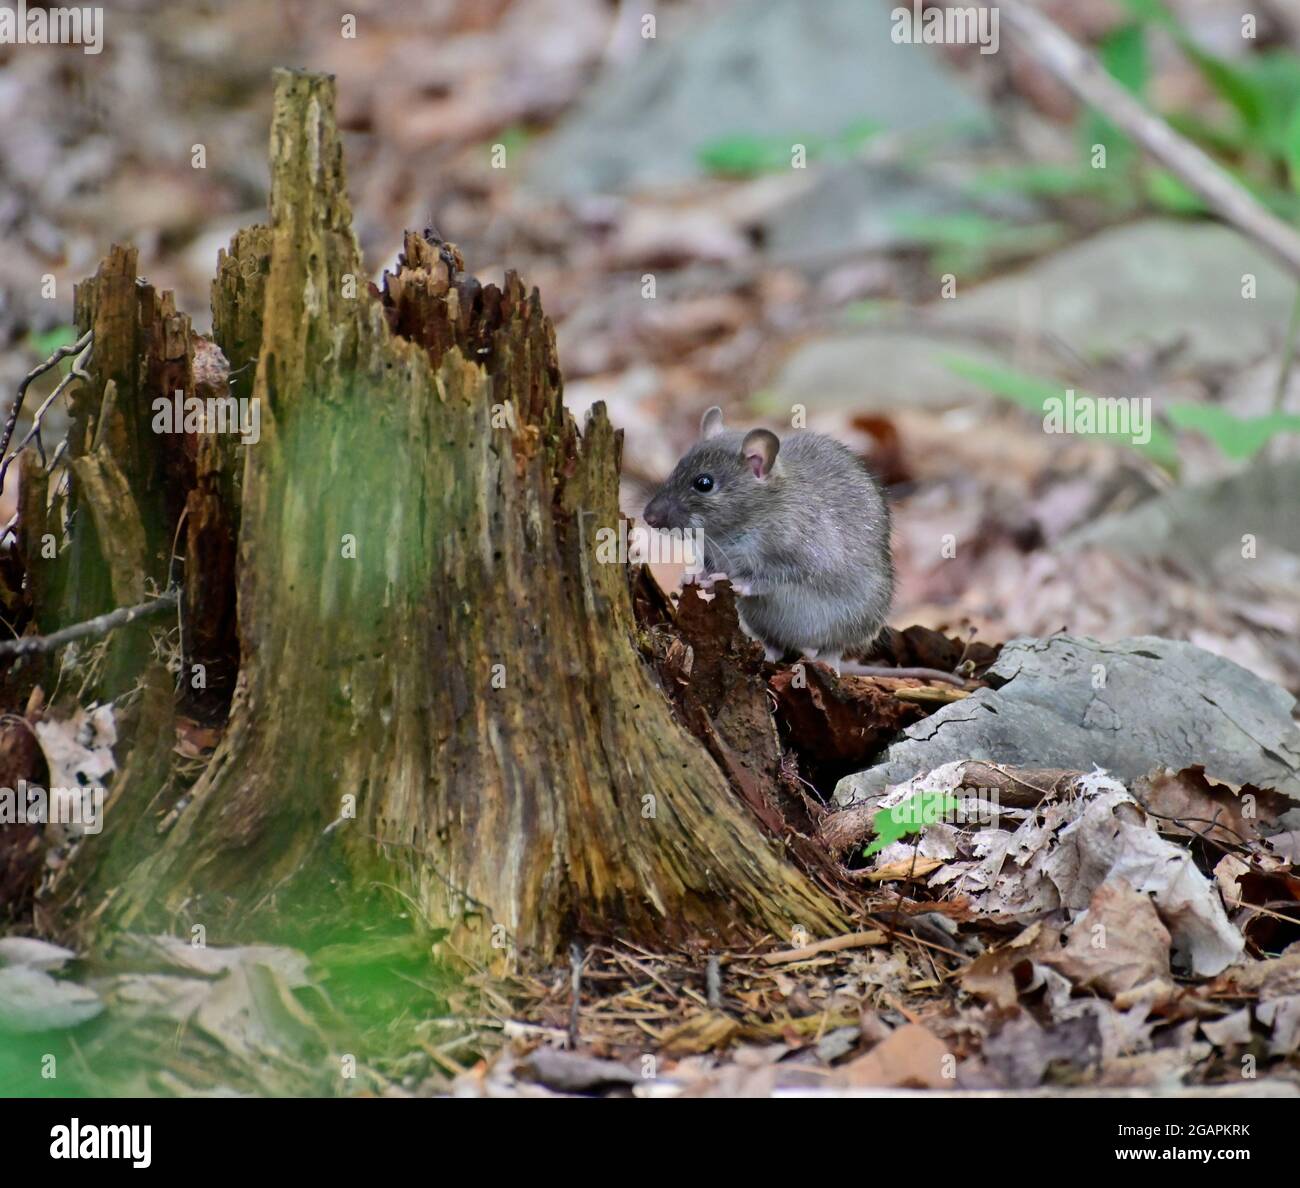 Wild wood mouse peeking out from behind a stump on the forest floor Stock Photo